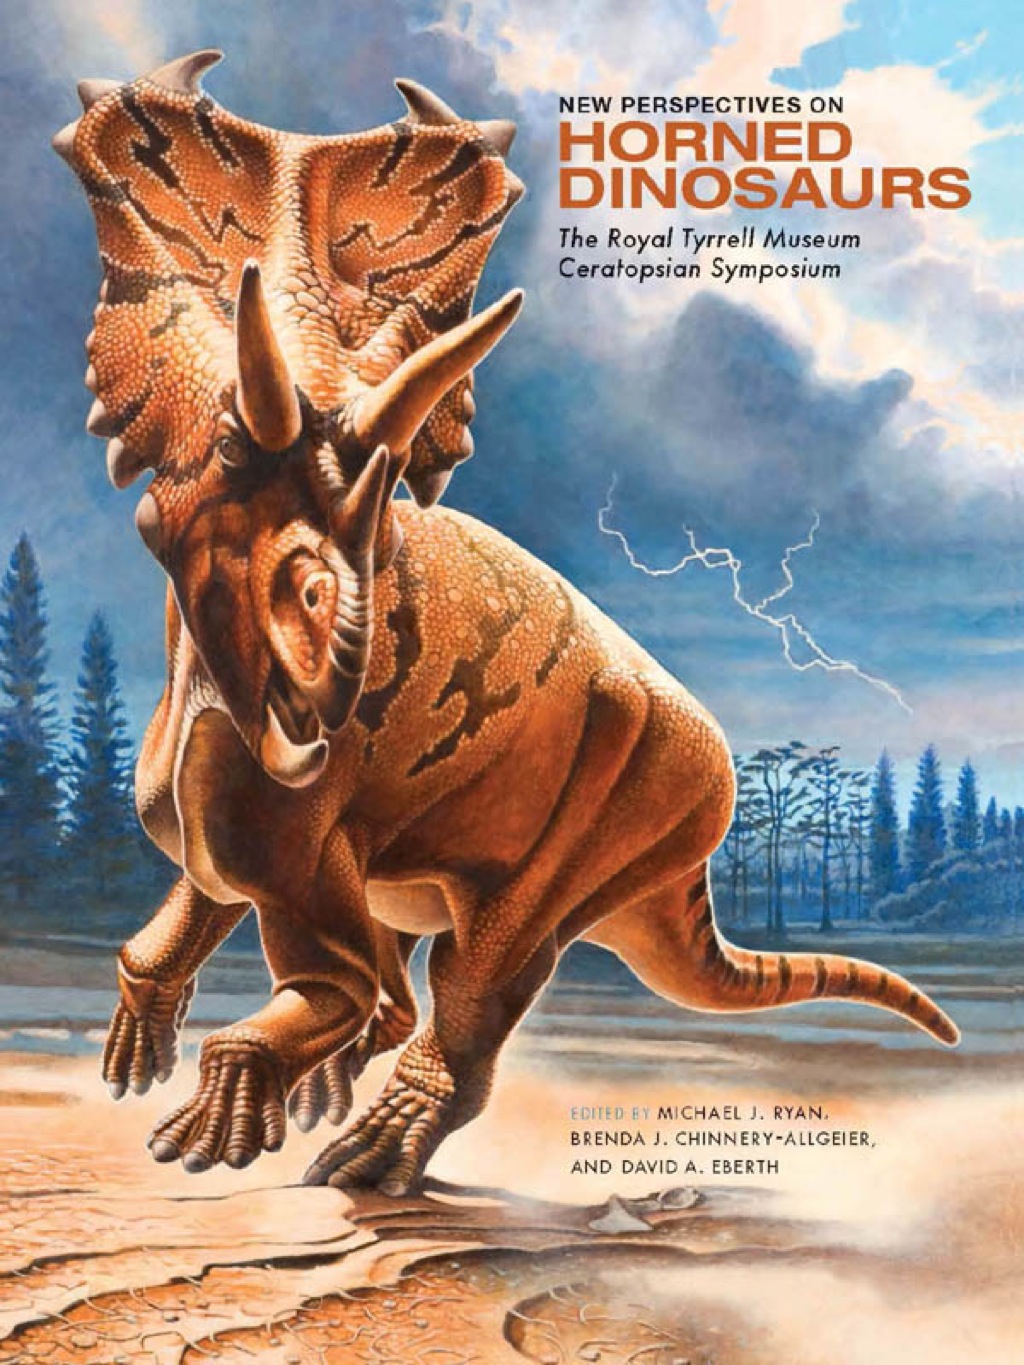 New Perspectives on Horned Dinosaurs (eBook)